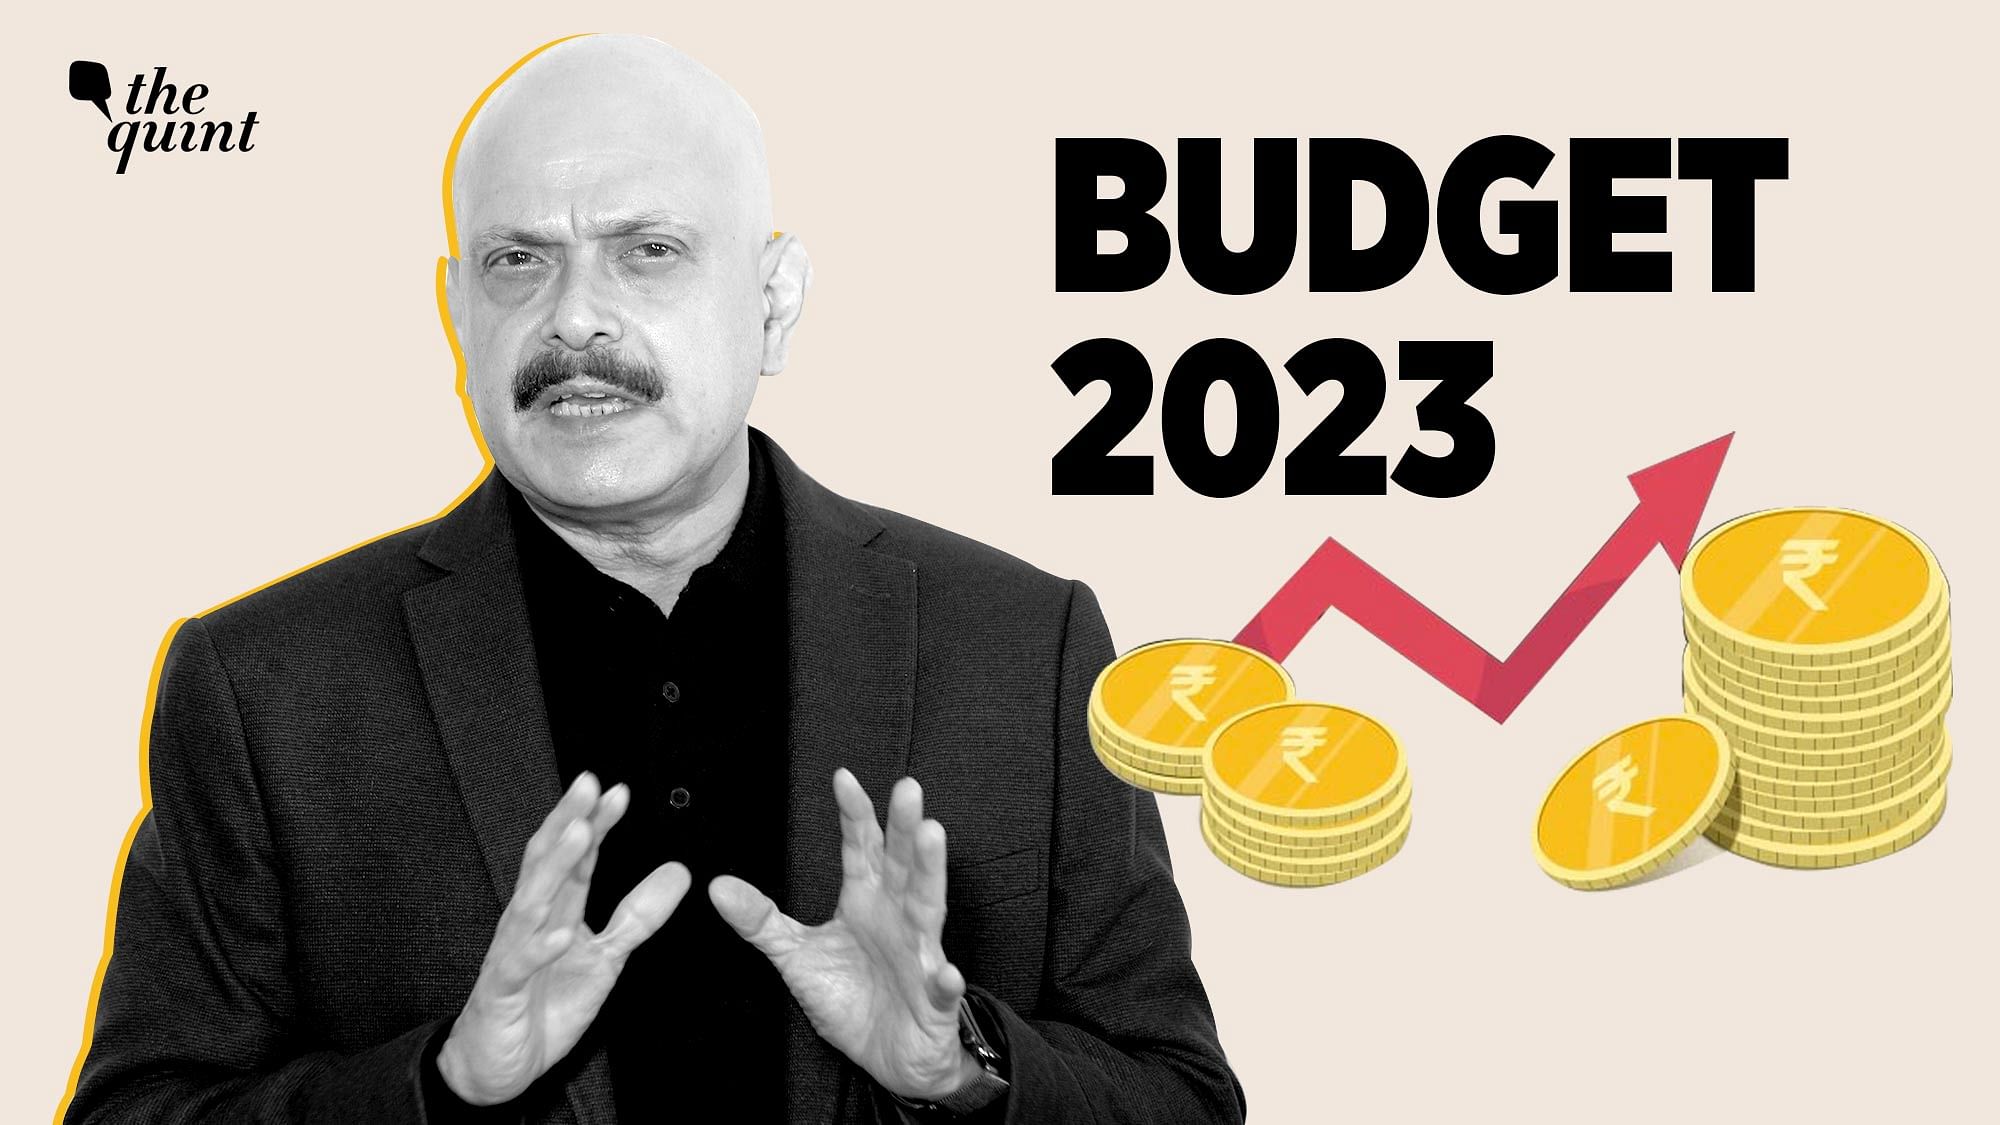 <div class="paragraphs"><p>Decode Budget 2023 with The Quint's Editor-in-Chief Raghav Bahl this Friday, 3 February.</p></div>